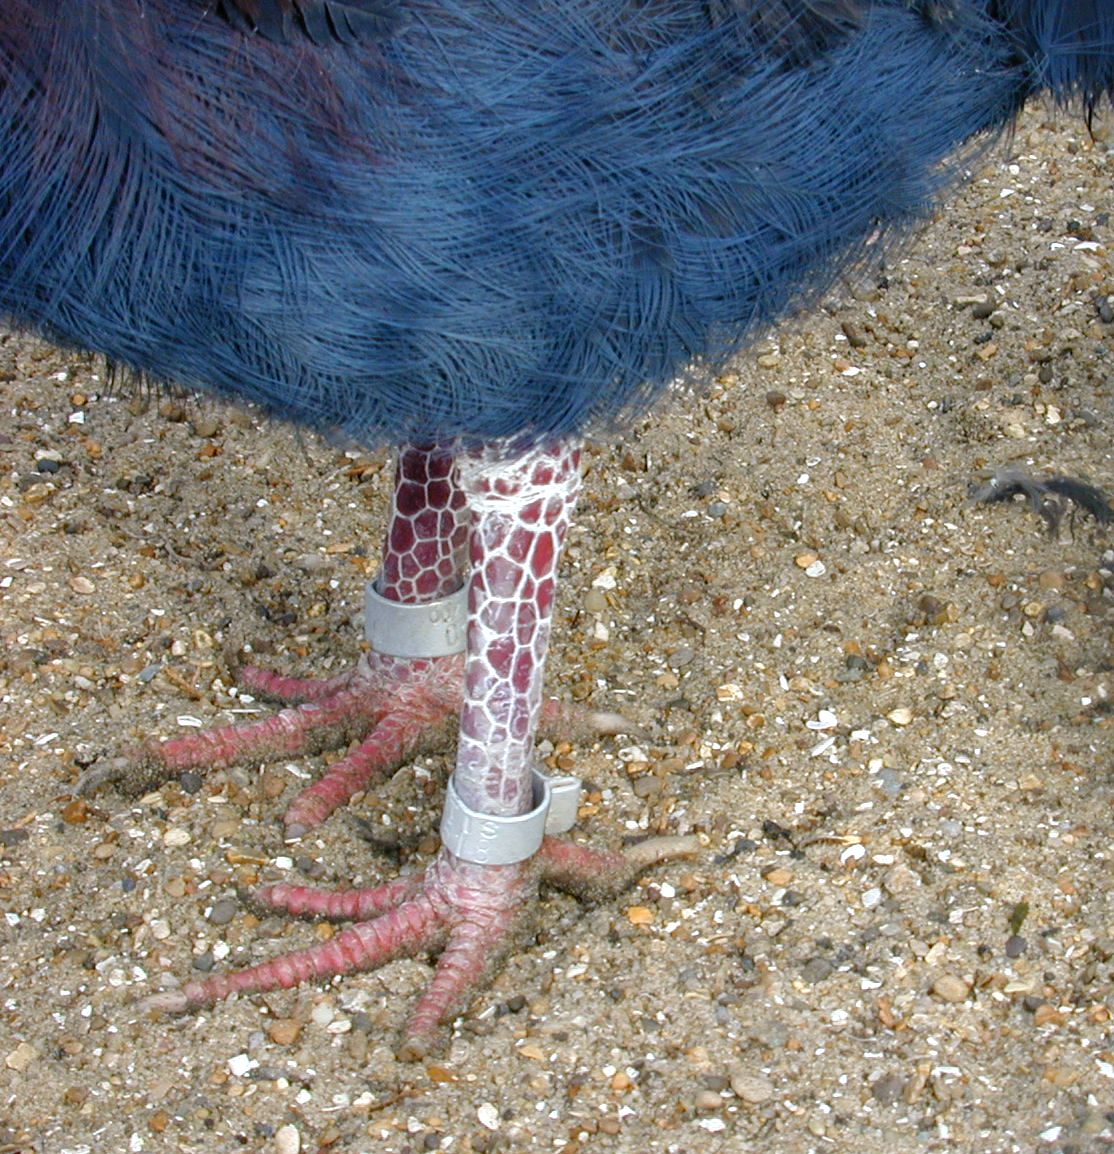 feet bird foot talons claws ring standing nails sand